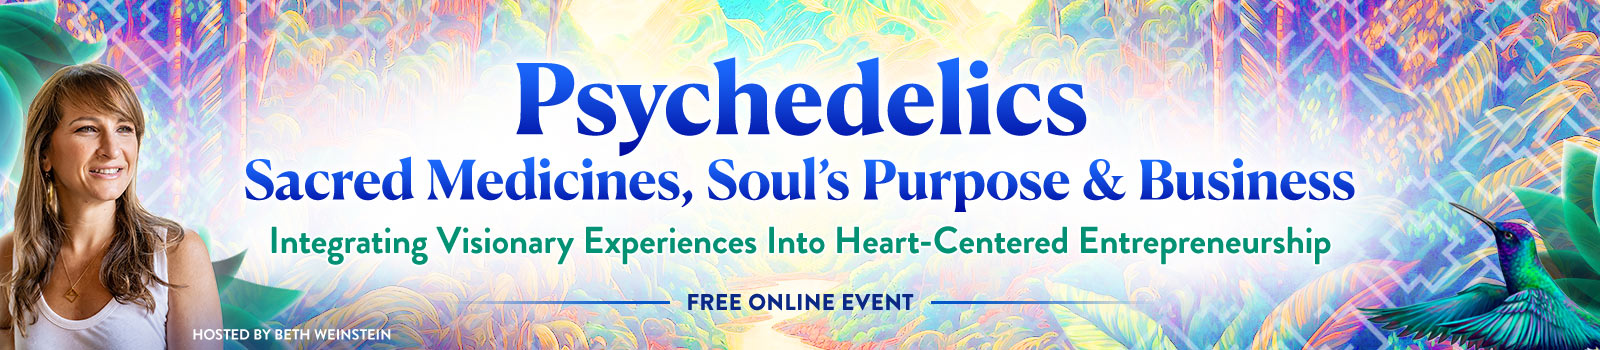 Psychedelics, Sacred Medicines, Soul's Purpose, Business summit